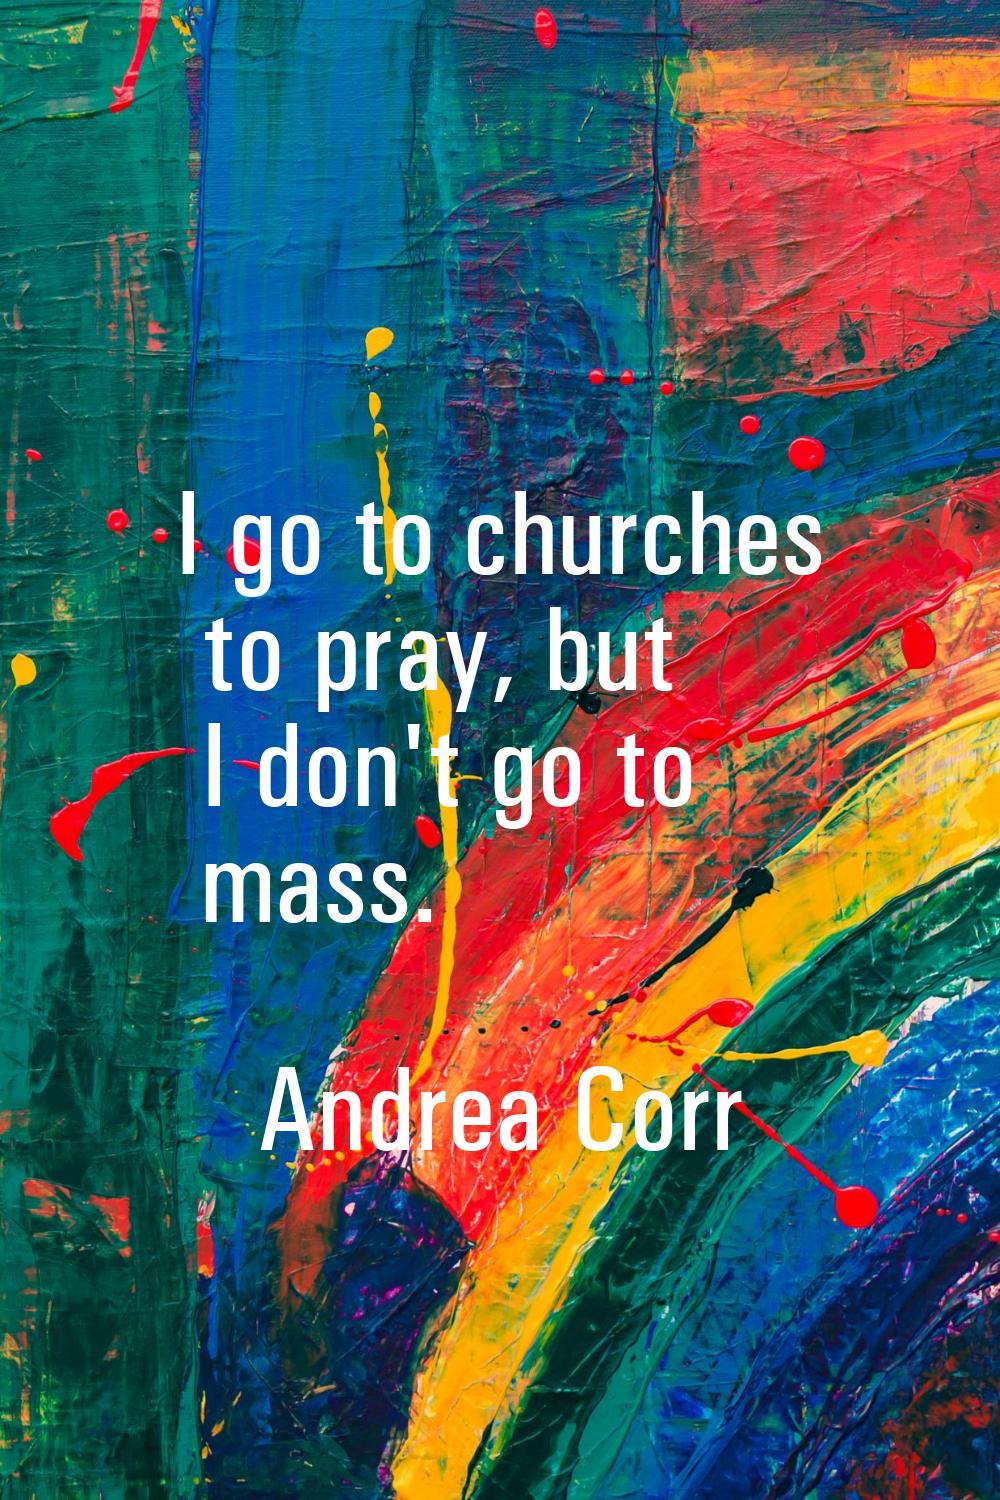 I go to churches to pray, but I don't go to mass.